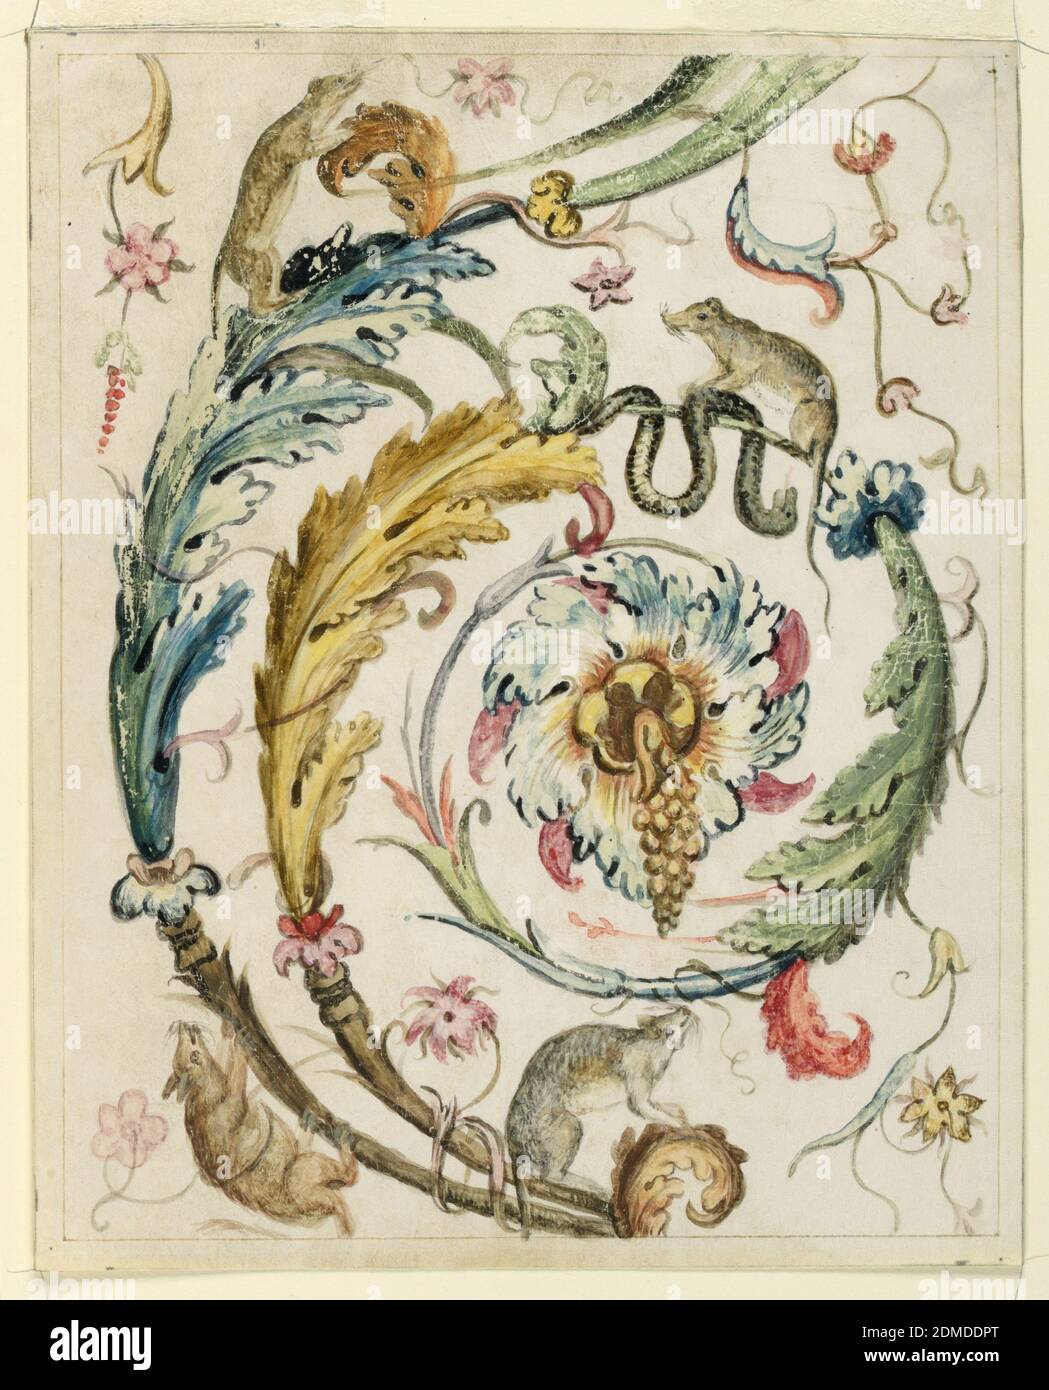 Foliate Arabesque with Rodents, Henri Salembier, French, 1753 - 1820, Brush, water color, gouache on vellum, Single scroll of a foliate arabesque, with four rodents shown climbing over the vines, and a snake curled about a tendril, beneath one rat. Copied motif from Raphael's Vatican loggia., Italy, 1650–1700, ornament, Drawing Stock Photo